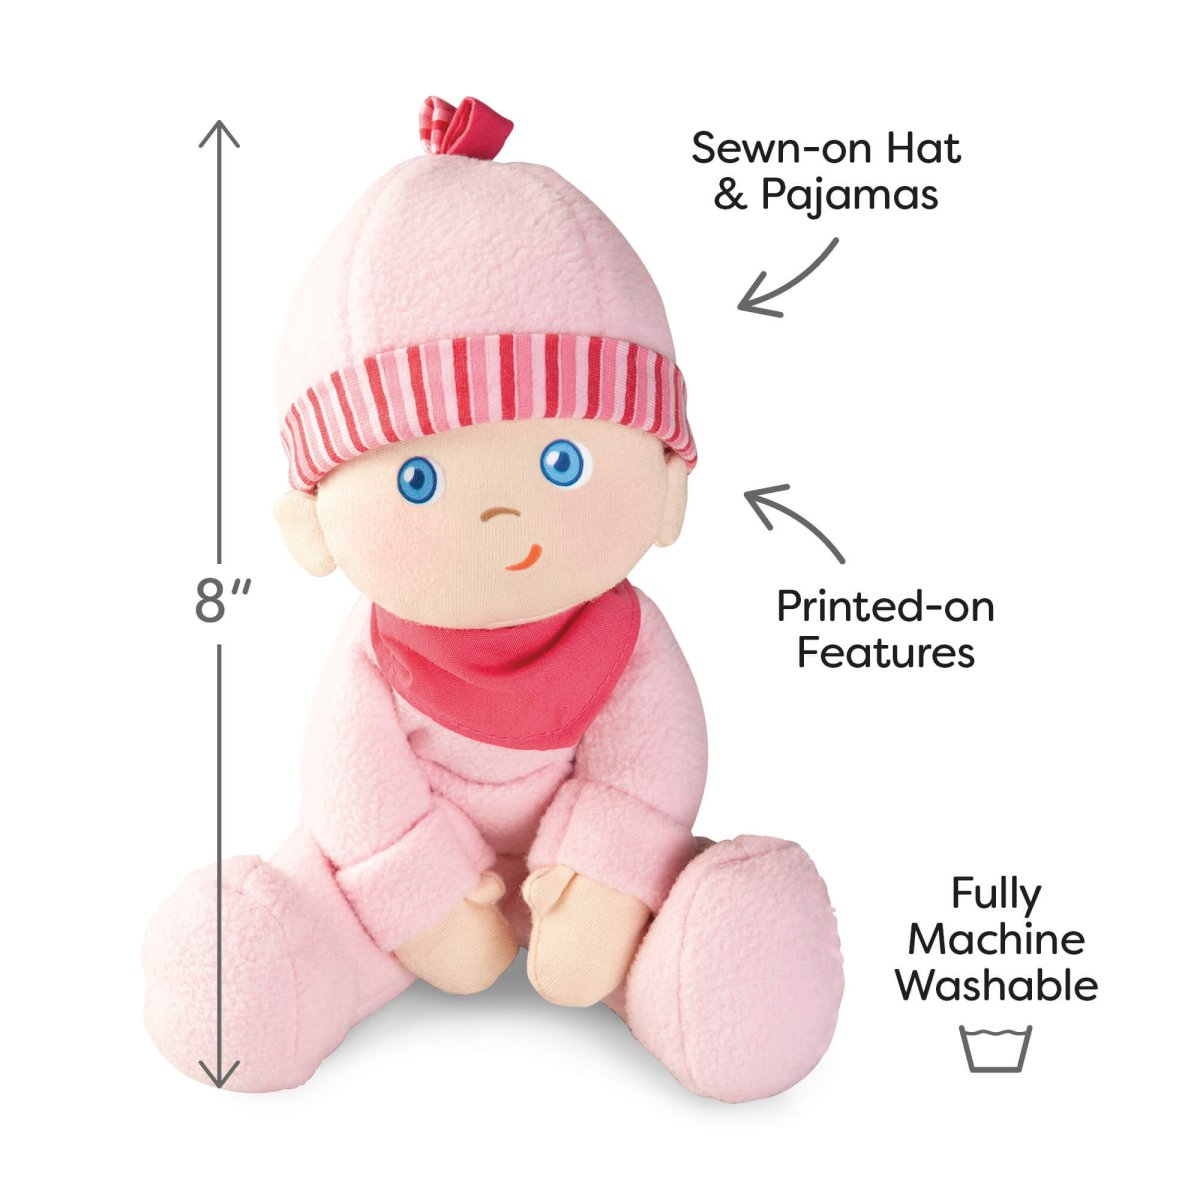 Snug Up Doll Luisa 8" First Doll